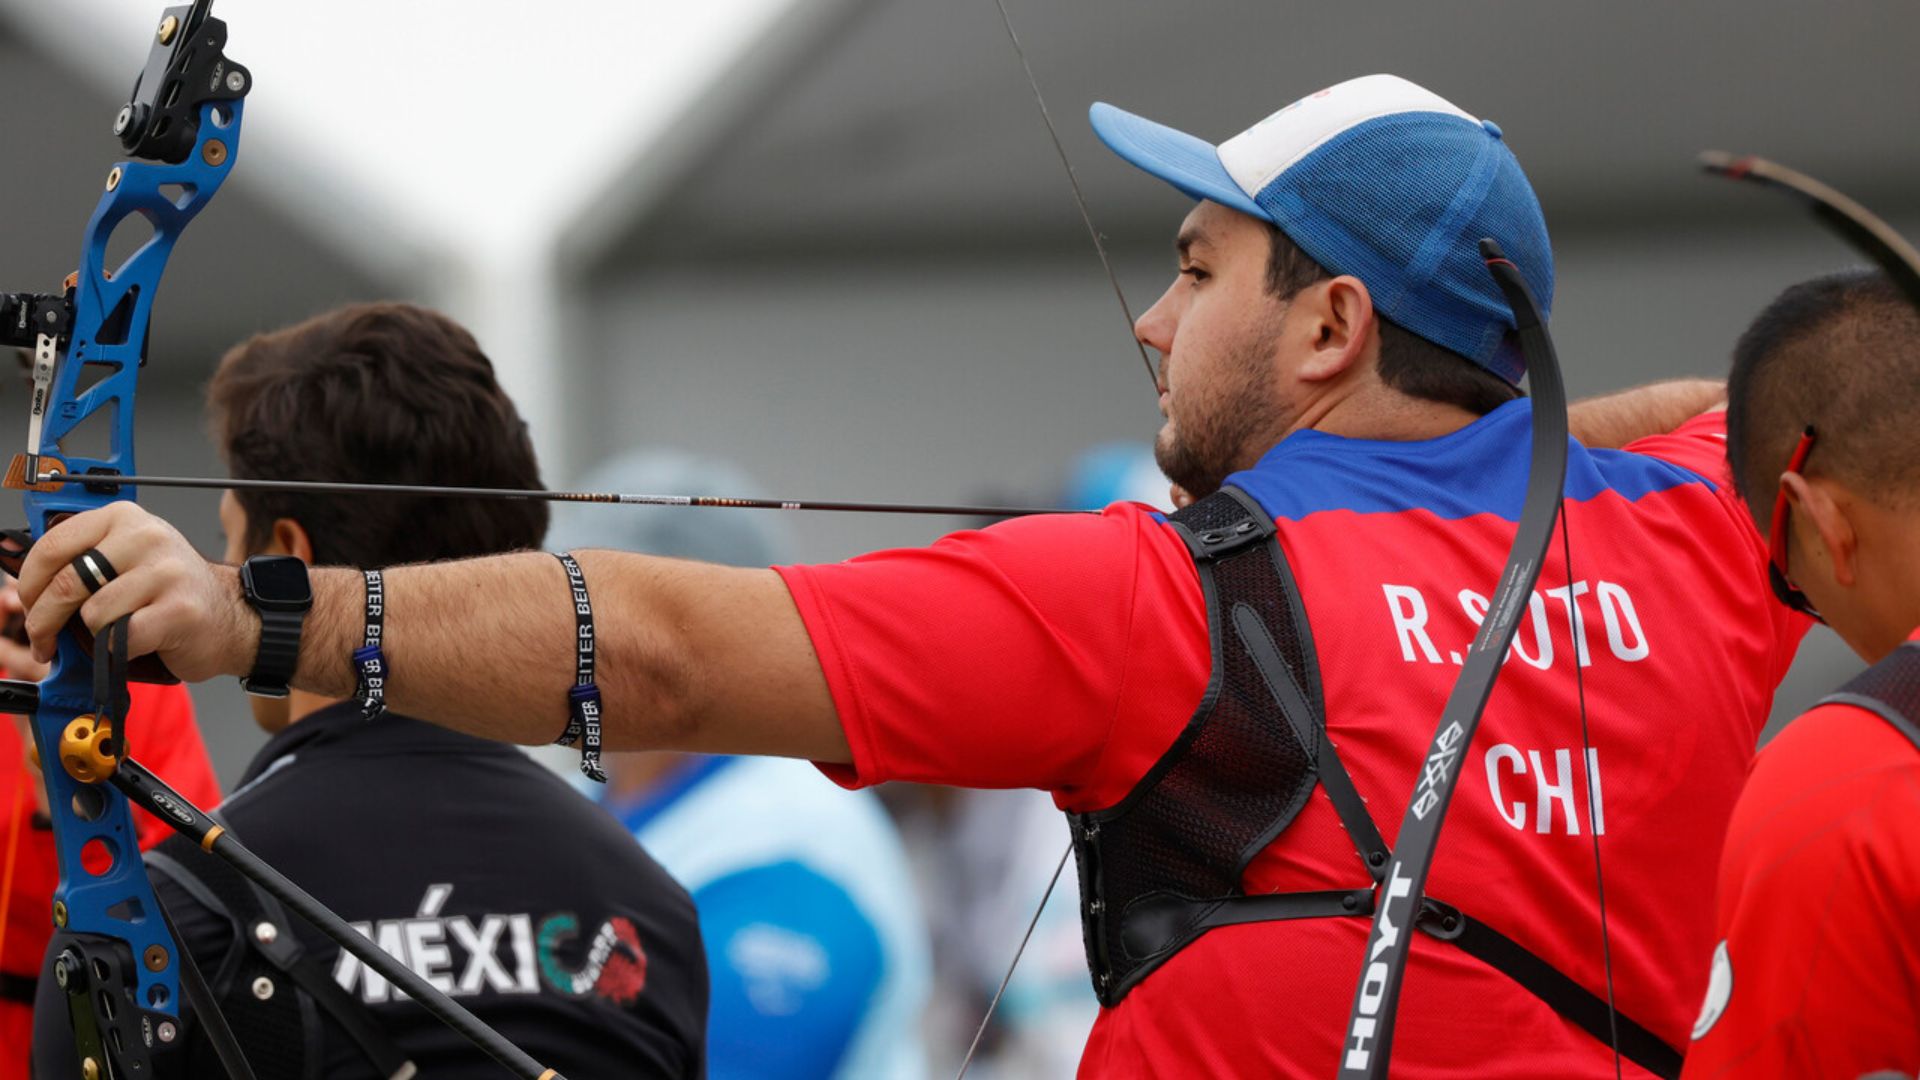 Ricardo Soto Aims for Gold and Advances with a Tremendous Victory in Archery